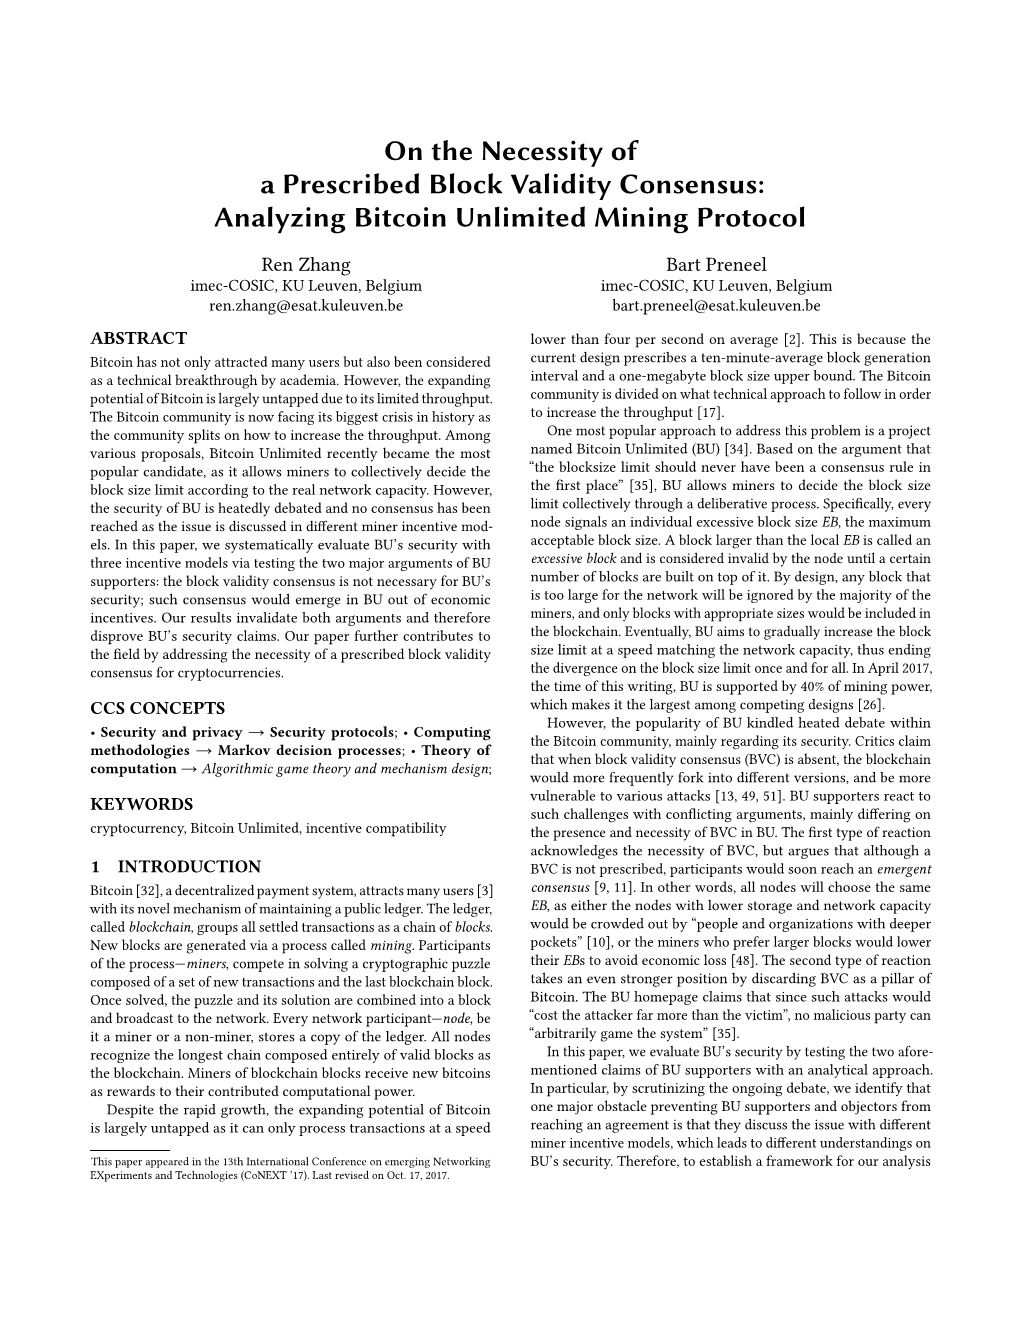 On the Necessity Ofa Prescribed Block Validity Consensus:Analyzing Bitcoin Unlimited Mining Protocol